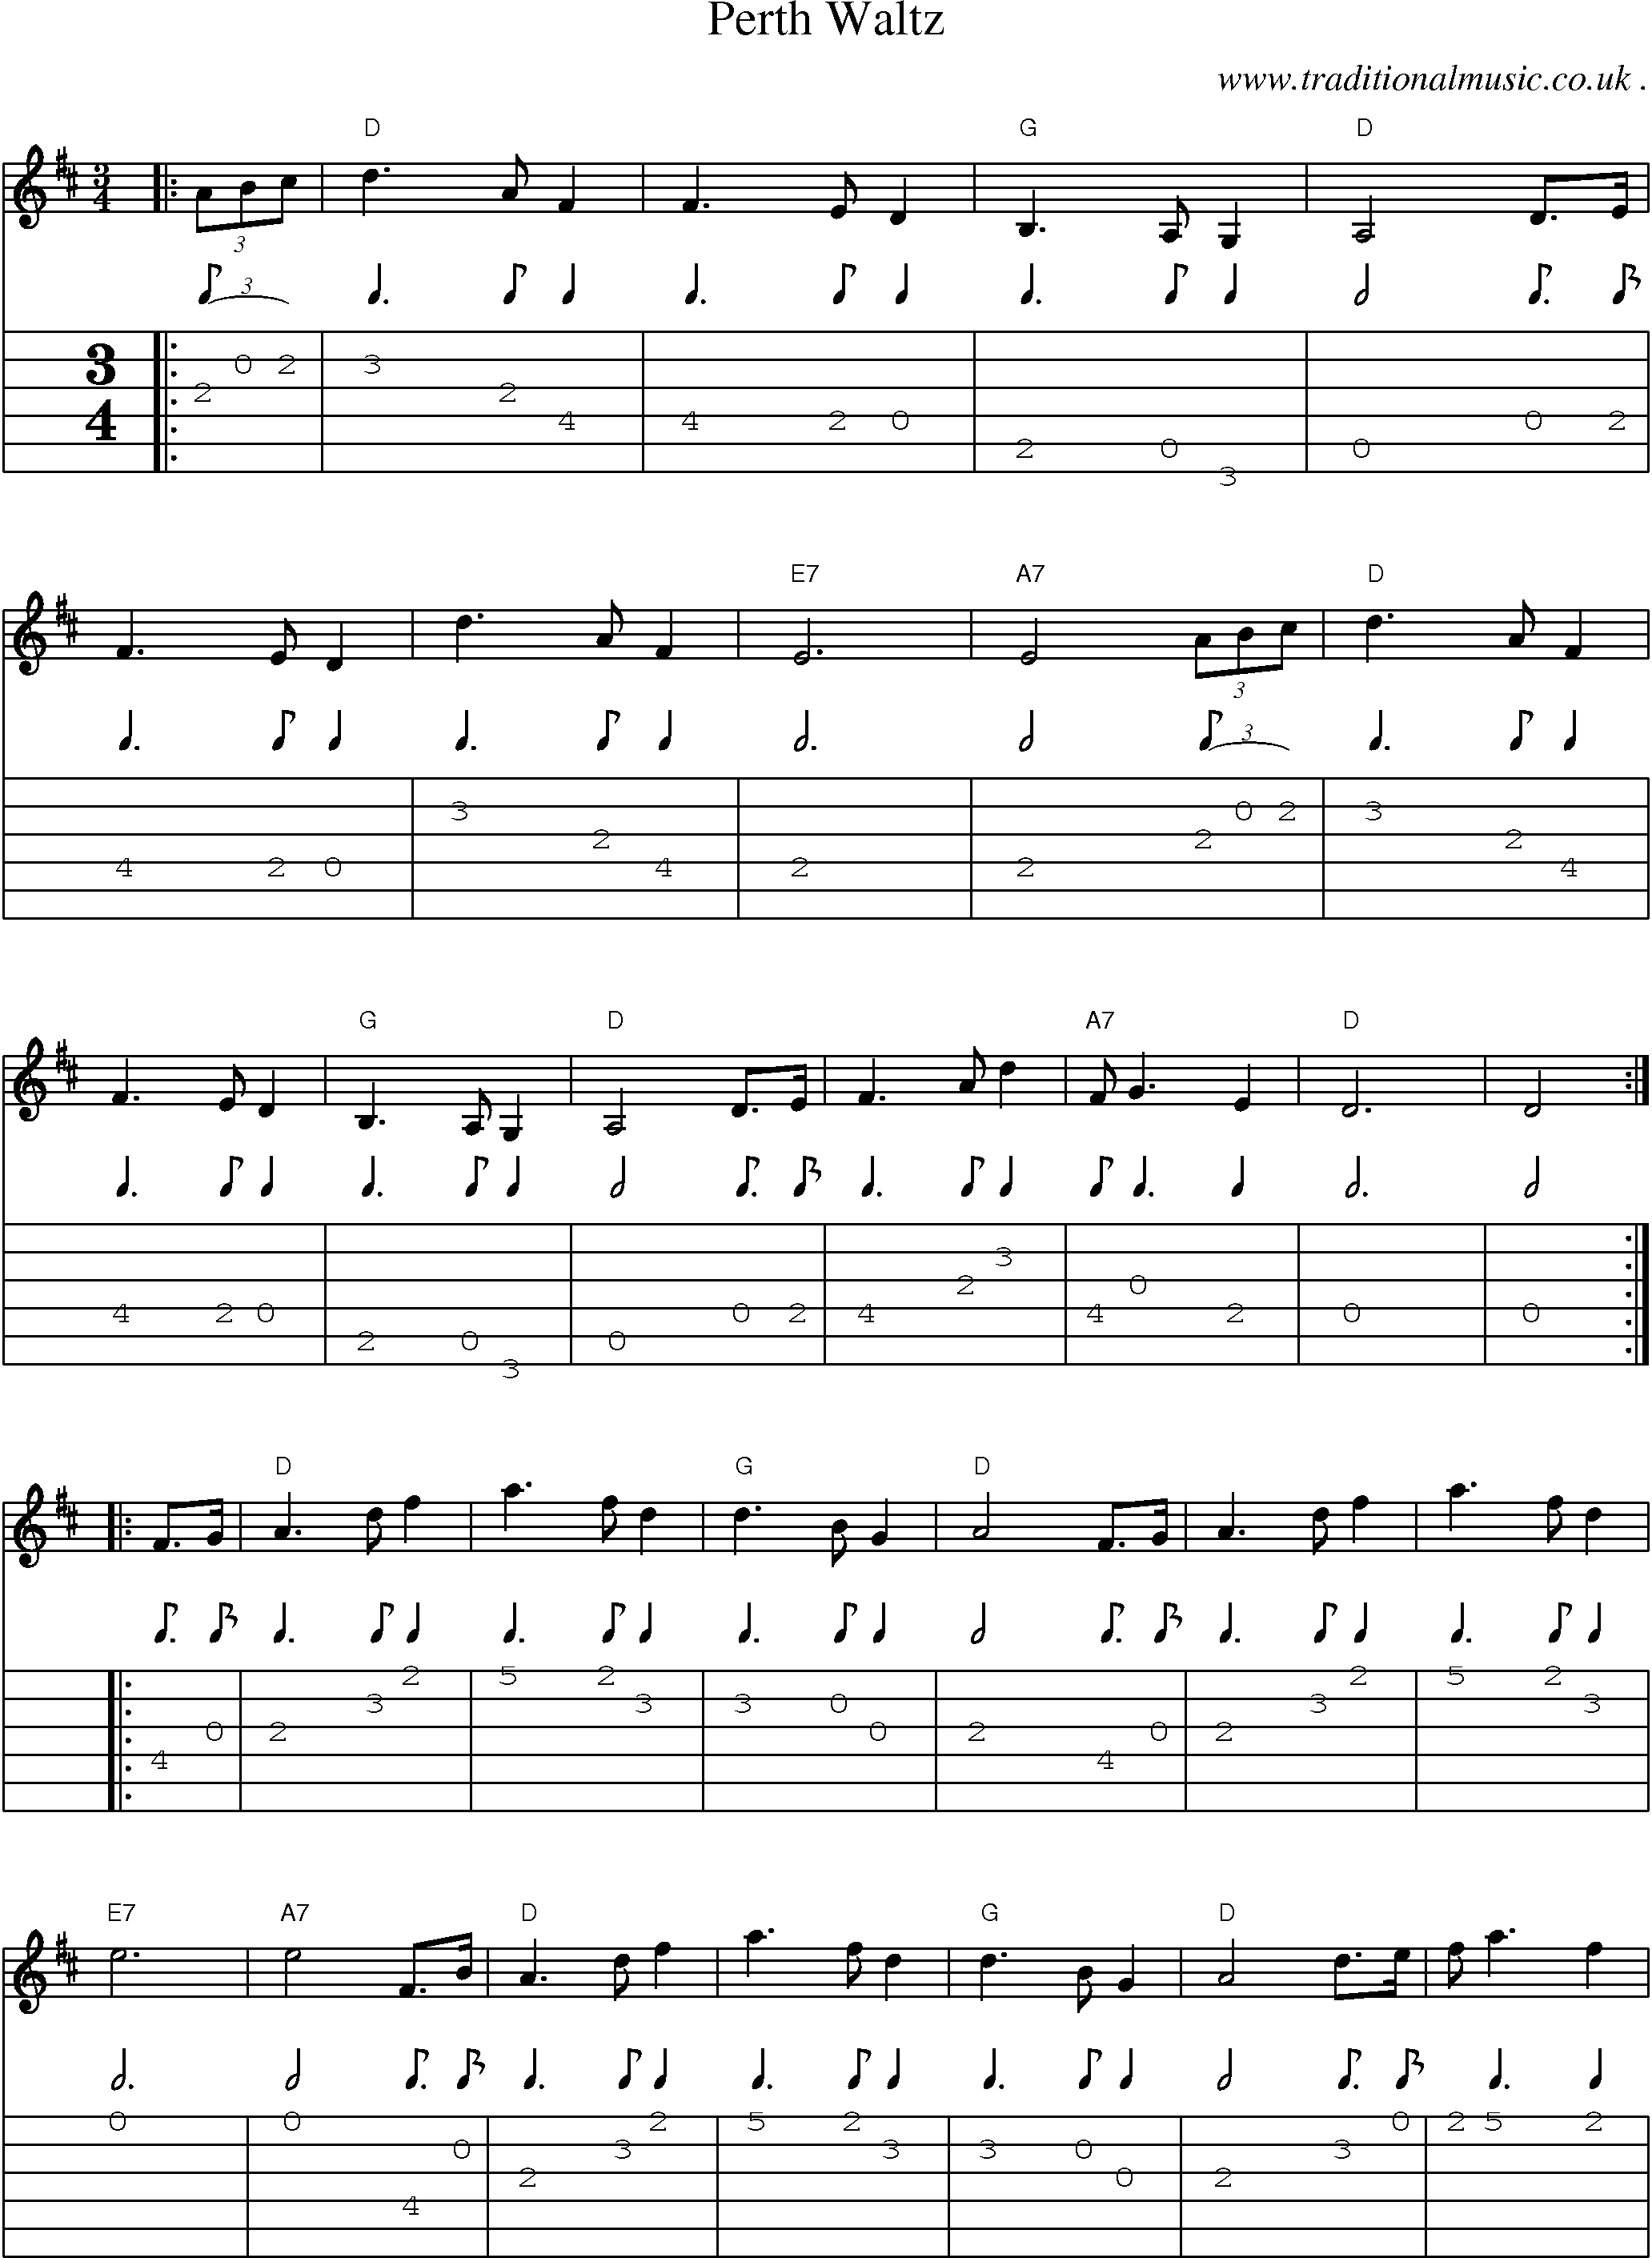 Sheet-Music and Guitar Tabs for Perth Waltz